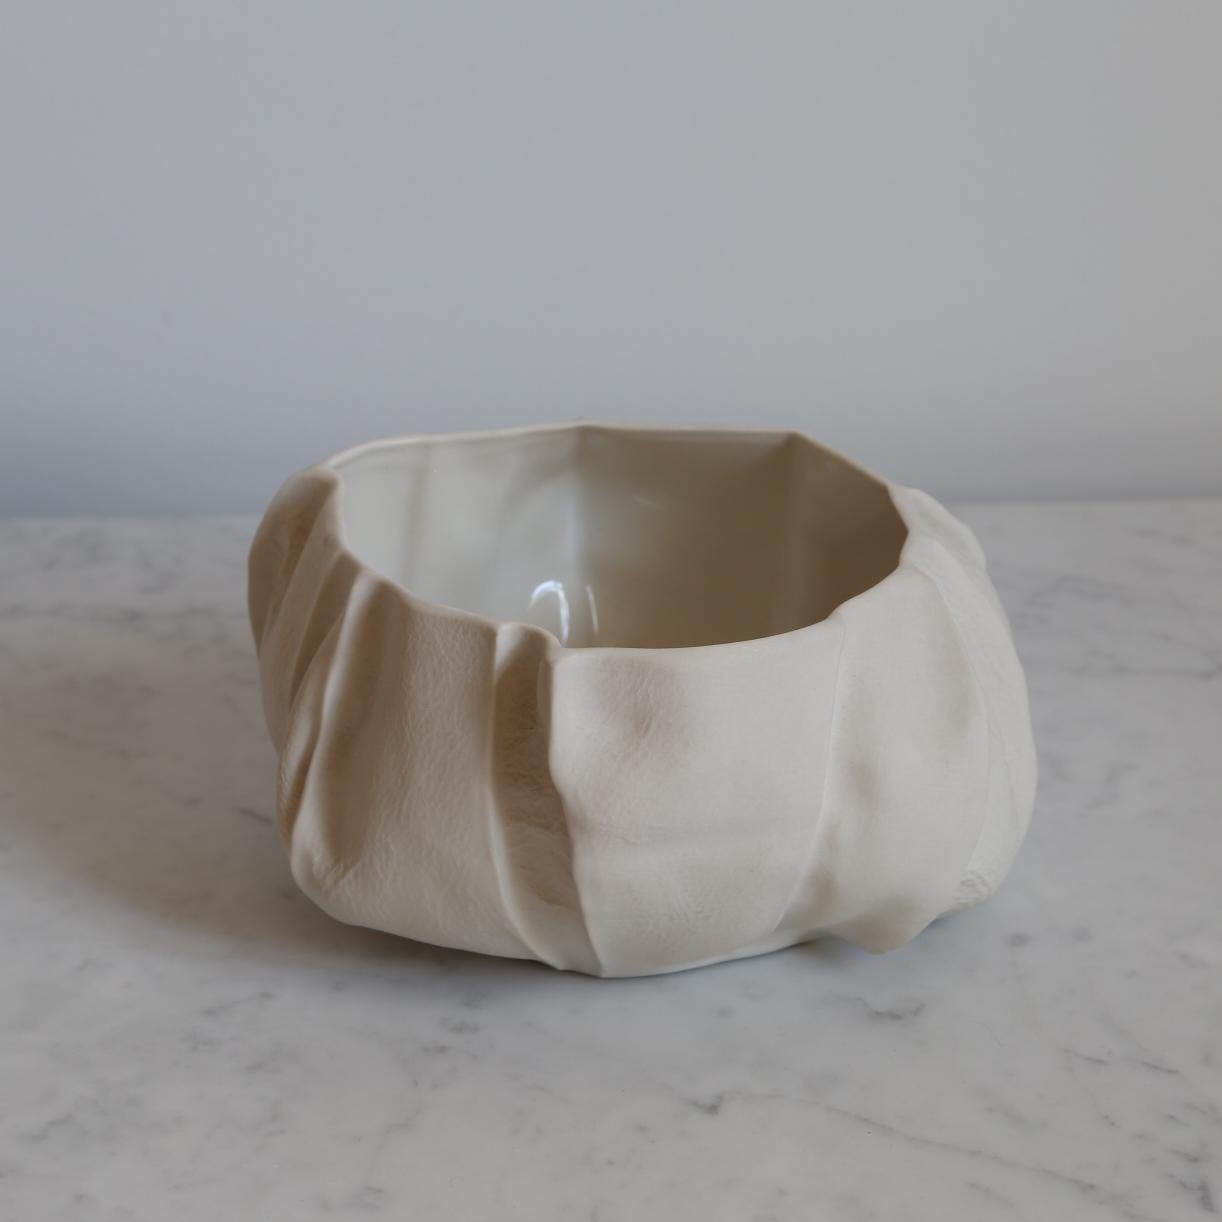 One of a Kind Kawa Bowl by Luft Tanaka, Ceramic, Porcelain, in Stock (Moderne)